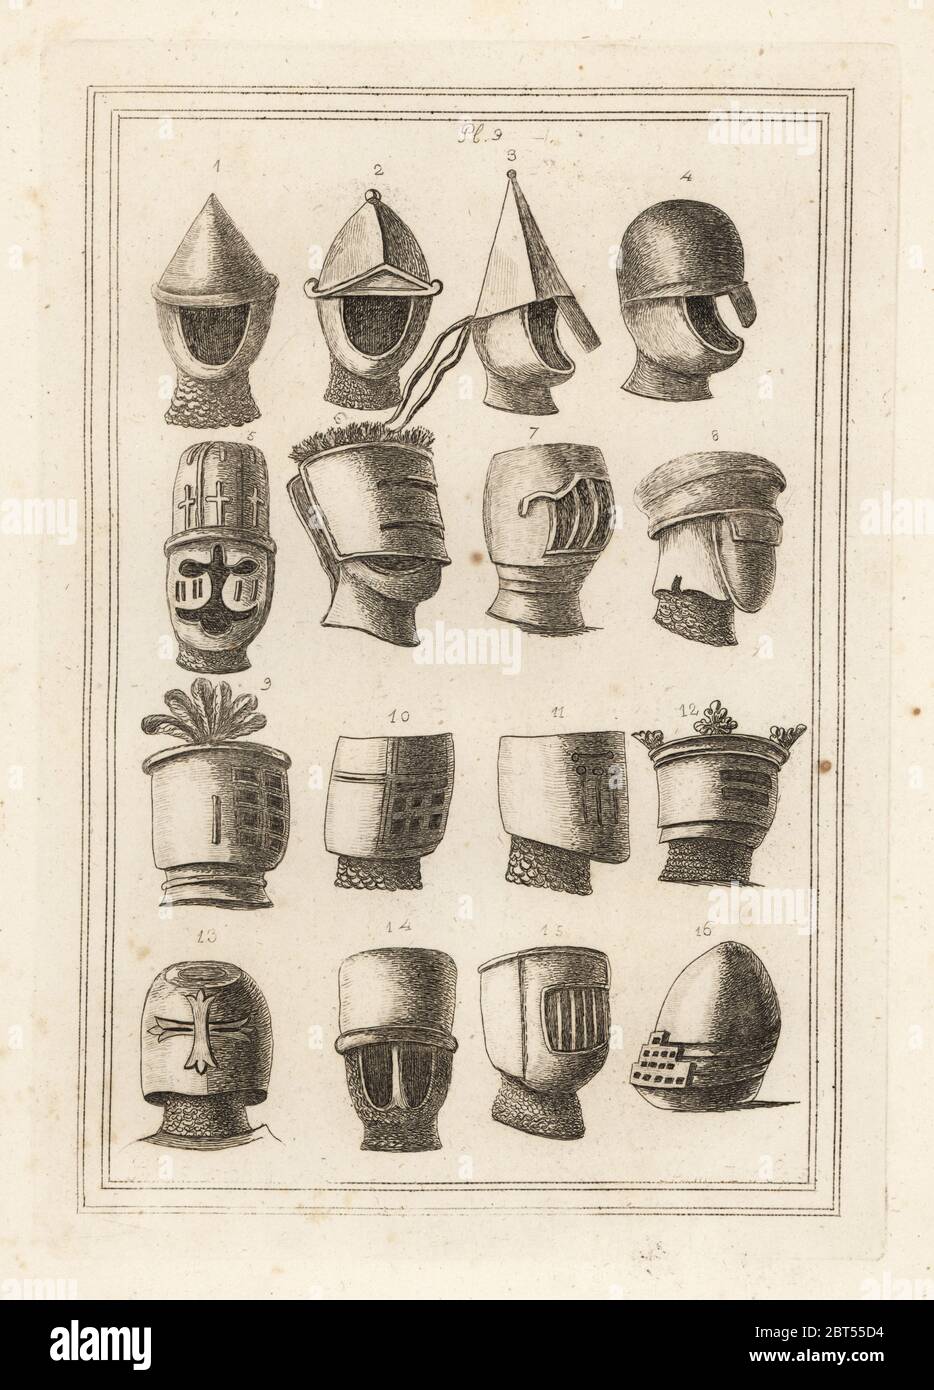 Helmets from the great seals of kings and barons. William the Conqueror 1,2, William Earl of Mellent 3, son of Richard I 4, Duke of Normandy 5, Richard I 6, Ferdinand III 7, Alexander II 8, Alexander III 9, John Earl Warren 10, Robert de Ghisnes 11, King Edward I 12, Hughes Vidame de Chalons 13, Raoul de Beaumont 14, Earl of Cornwall 15 and Edward IIIs son Edward 16. Copperplate engraving from Francis Grose's Military Antiquities respecting a History of the English Army, Stockdale, London, 1812. Stock Photo